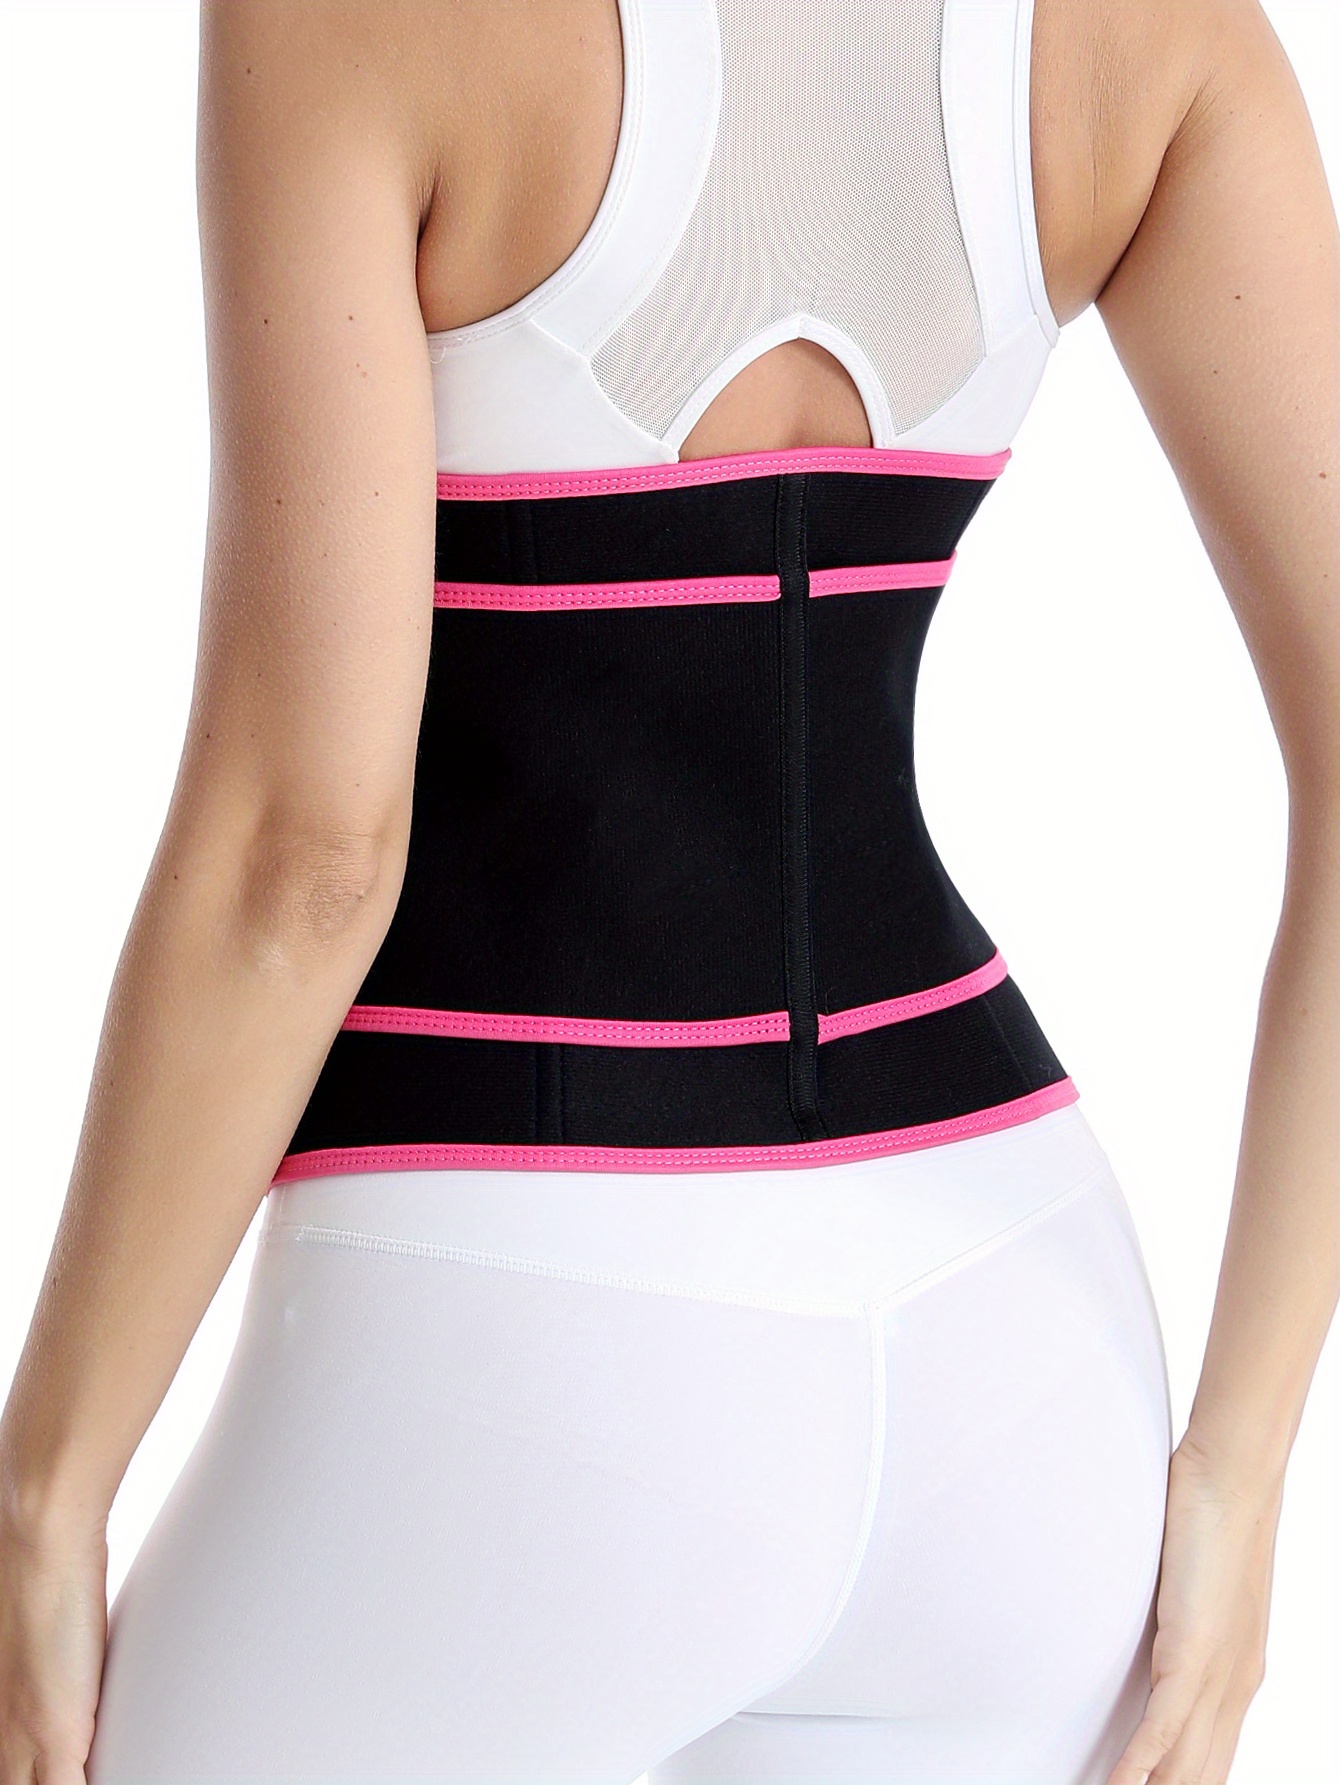 Fitness Slimmer Sweat Belt Weight Loss Back Support Waist Trainer - China  Fitness Belt Sweating Sports and Adjustable Sweat Belt price